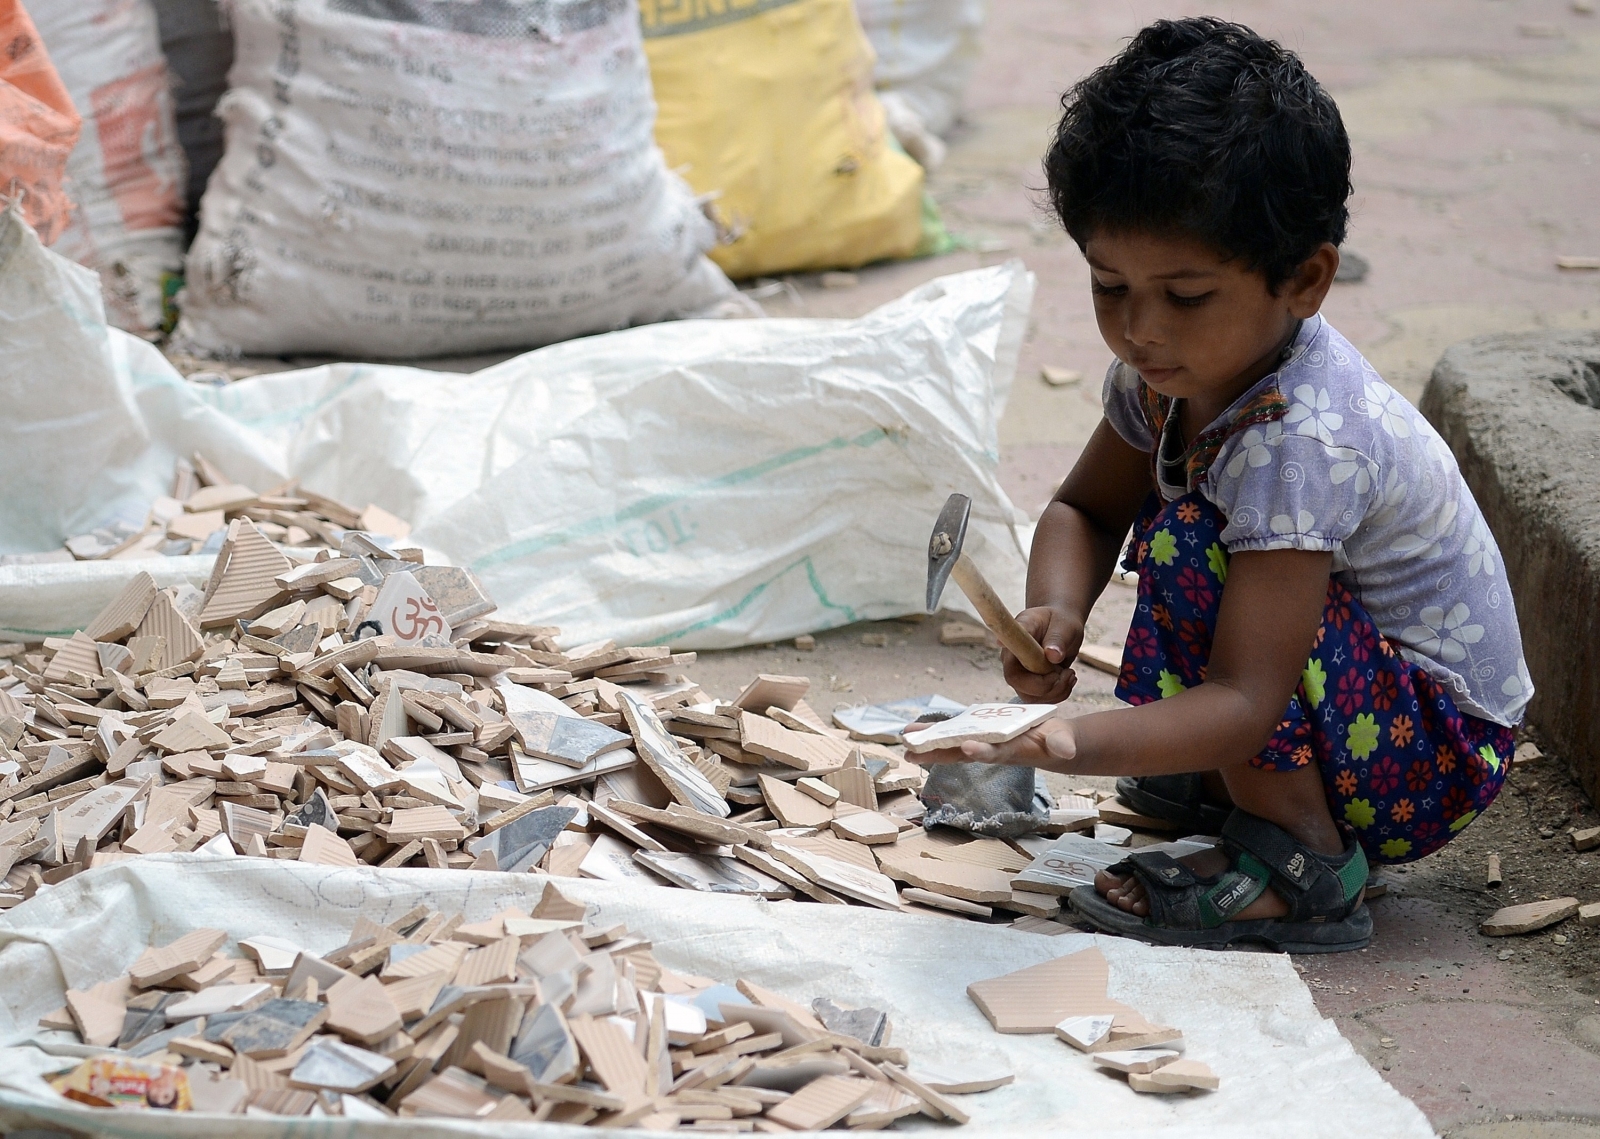 729 words essay on child labour free to read)